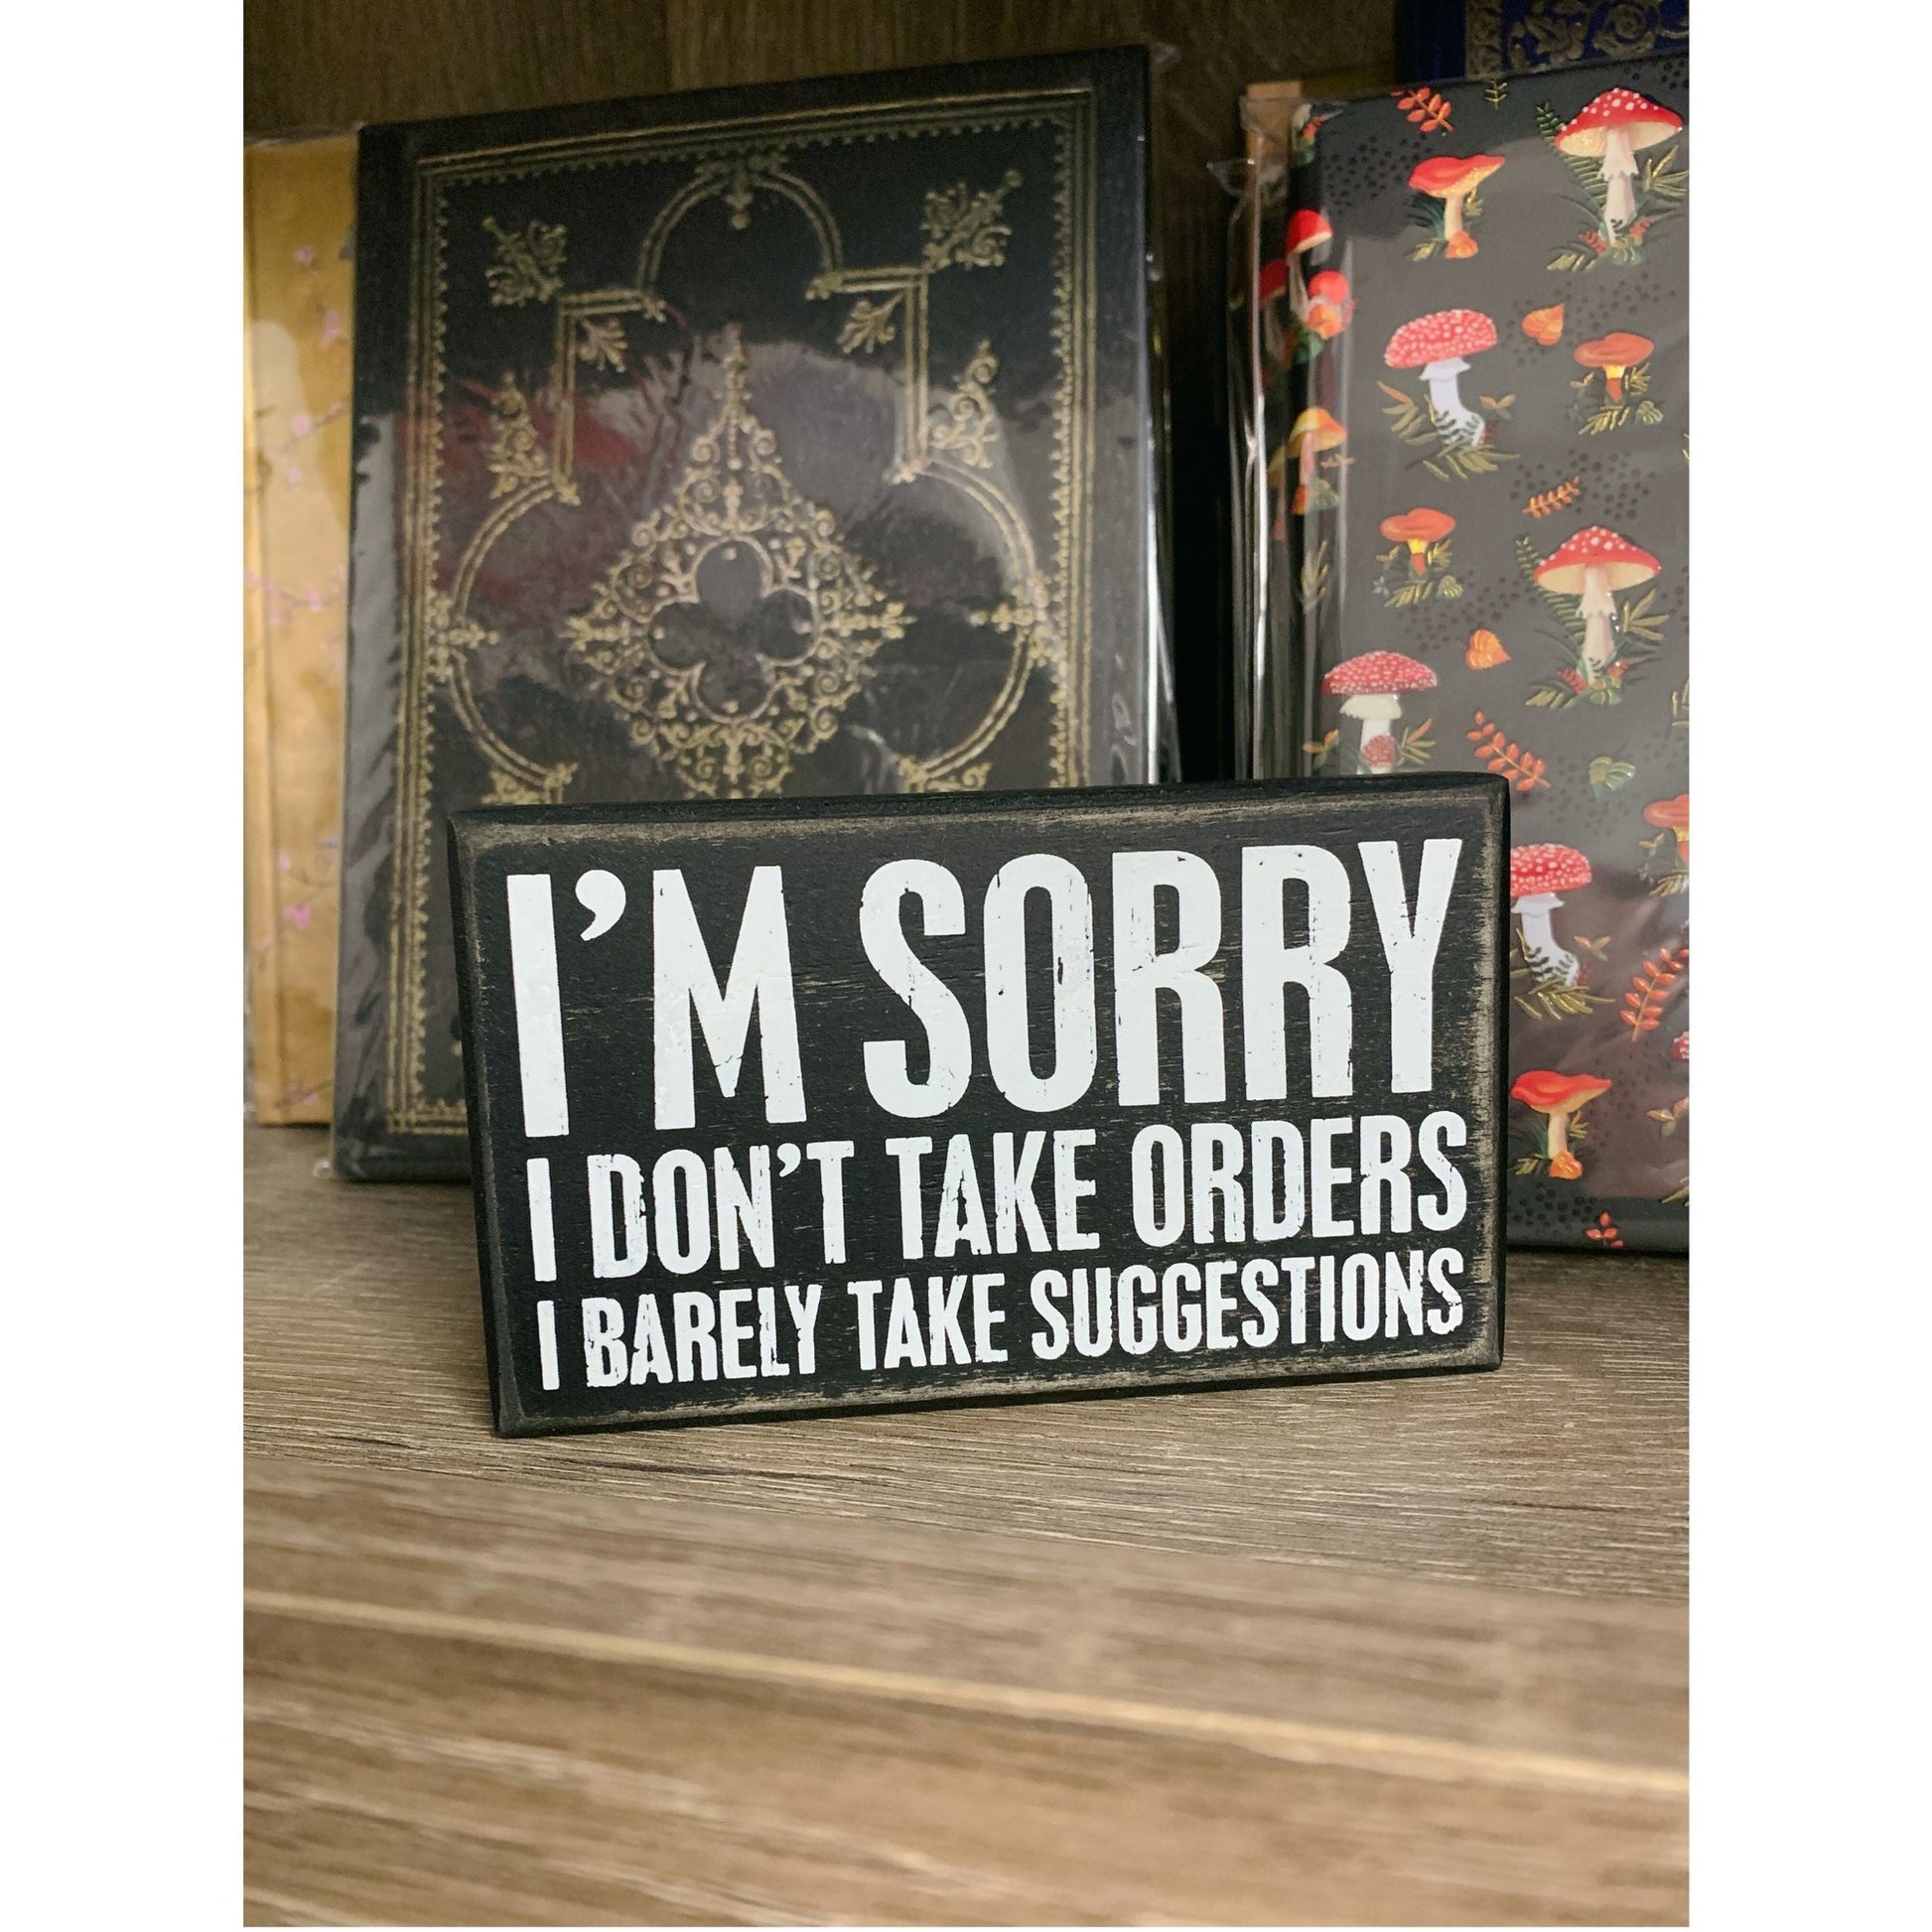 I'm Sorry I Don't Take Orders Wooden Box Sign with White Lettering | 5" x 3"